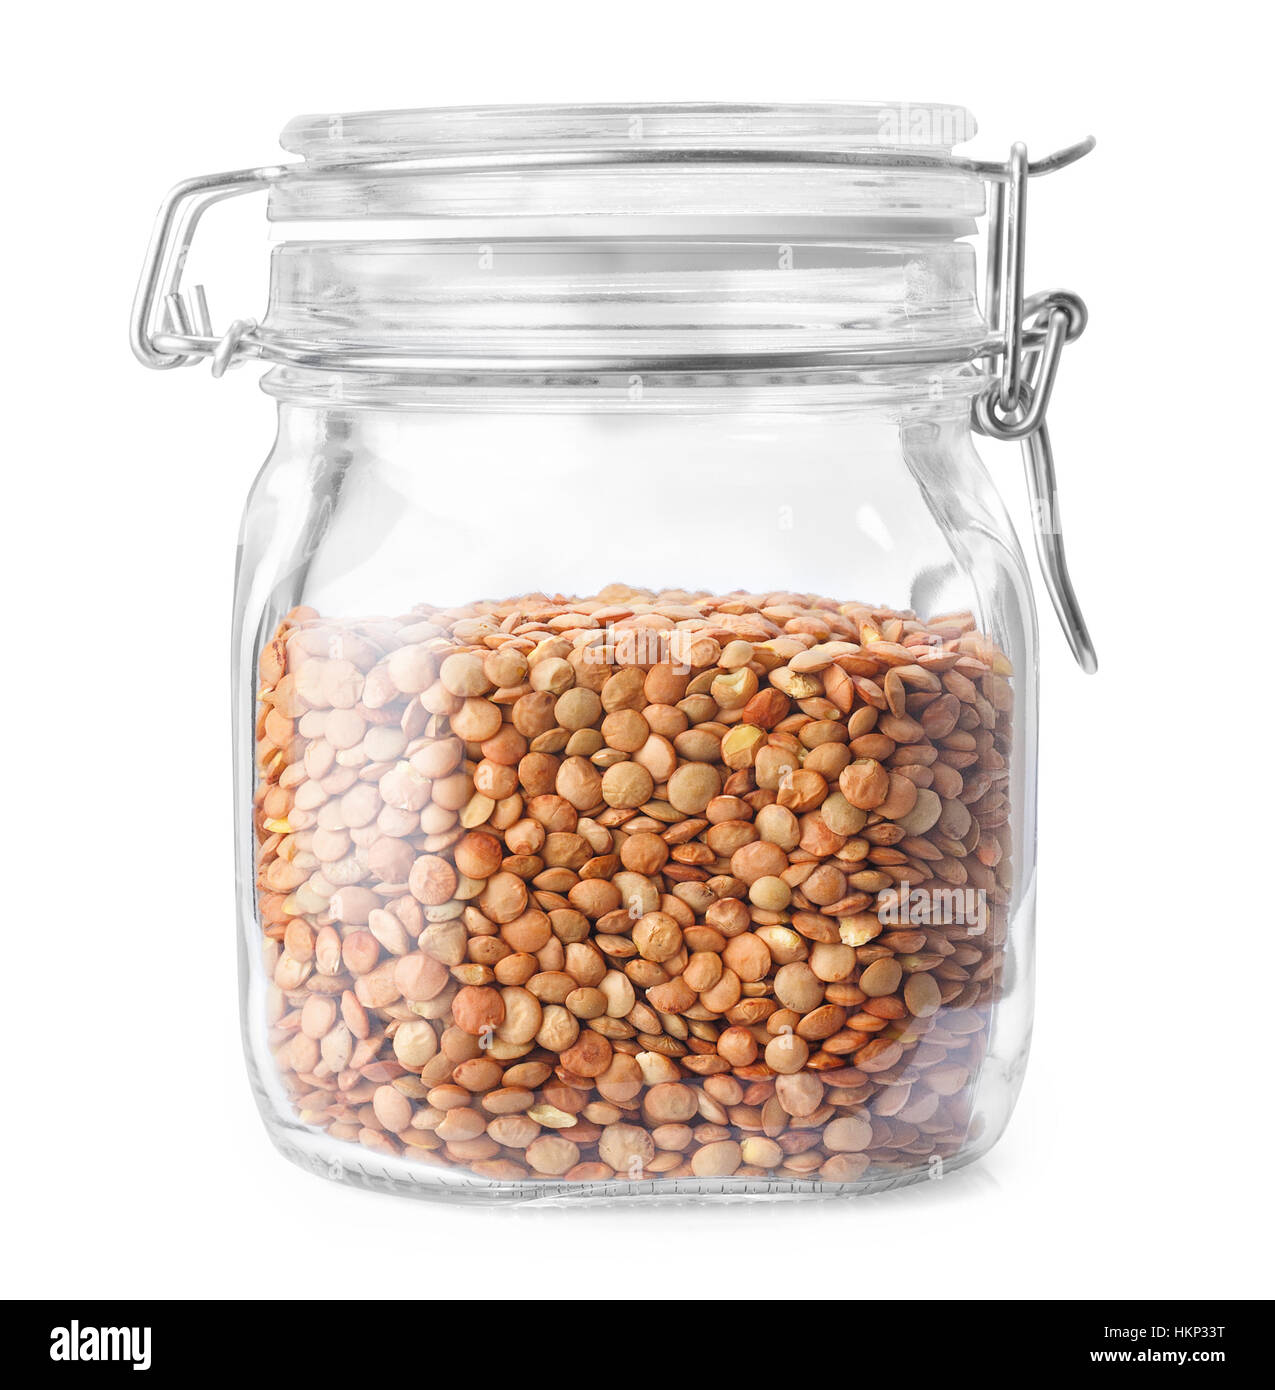 lentil in a glass jar isolate Stock Photo